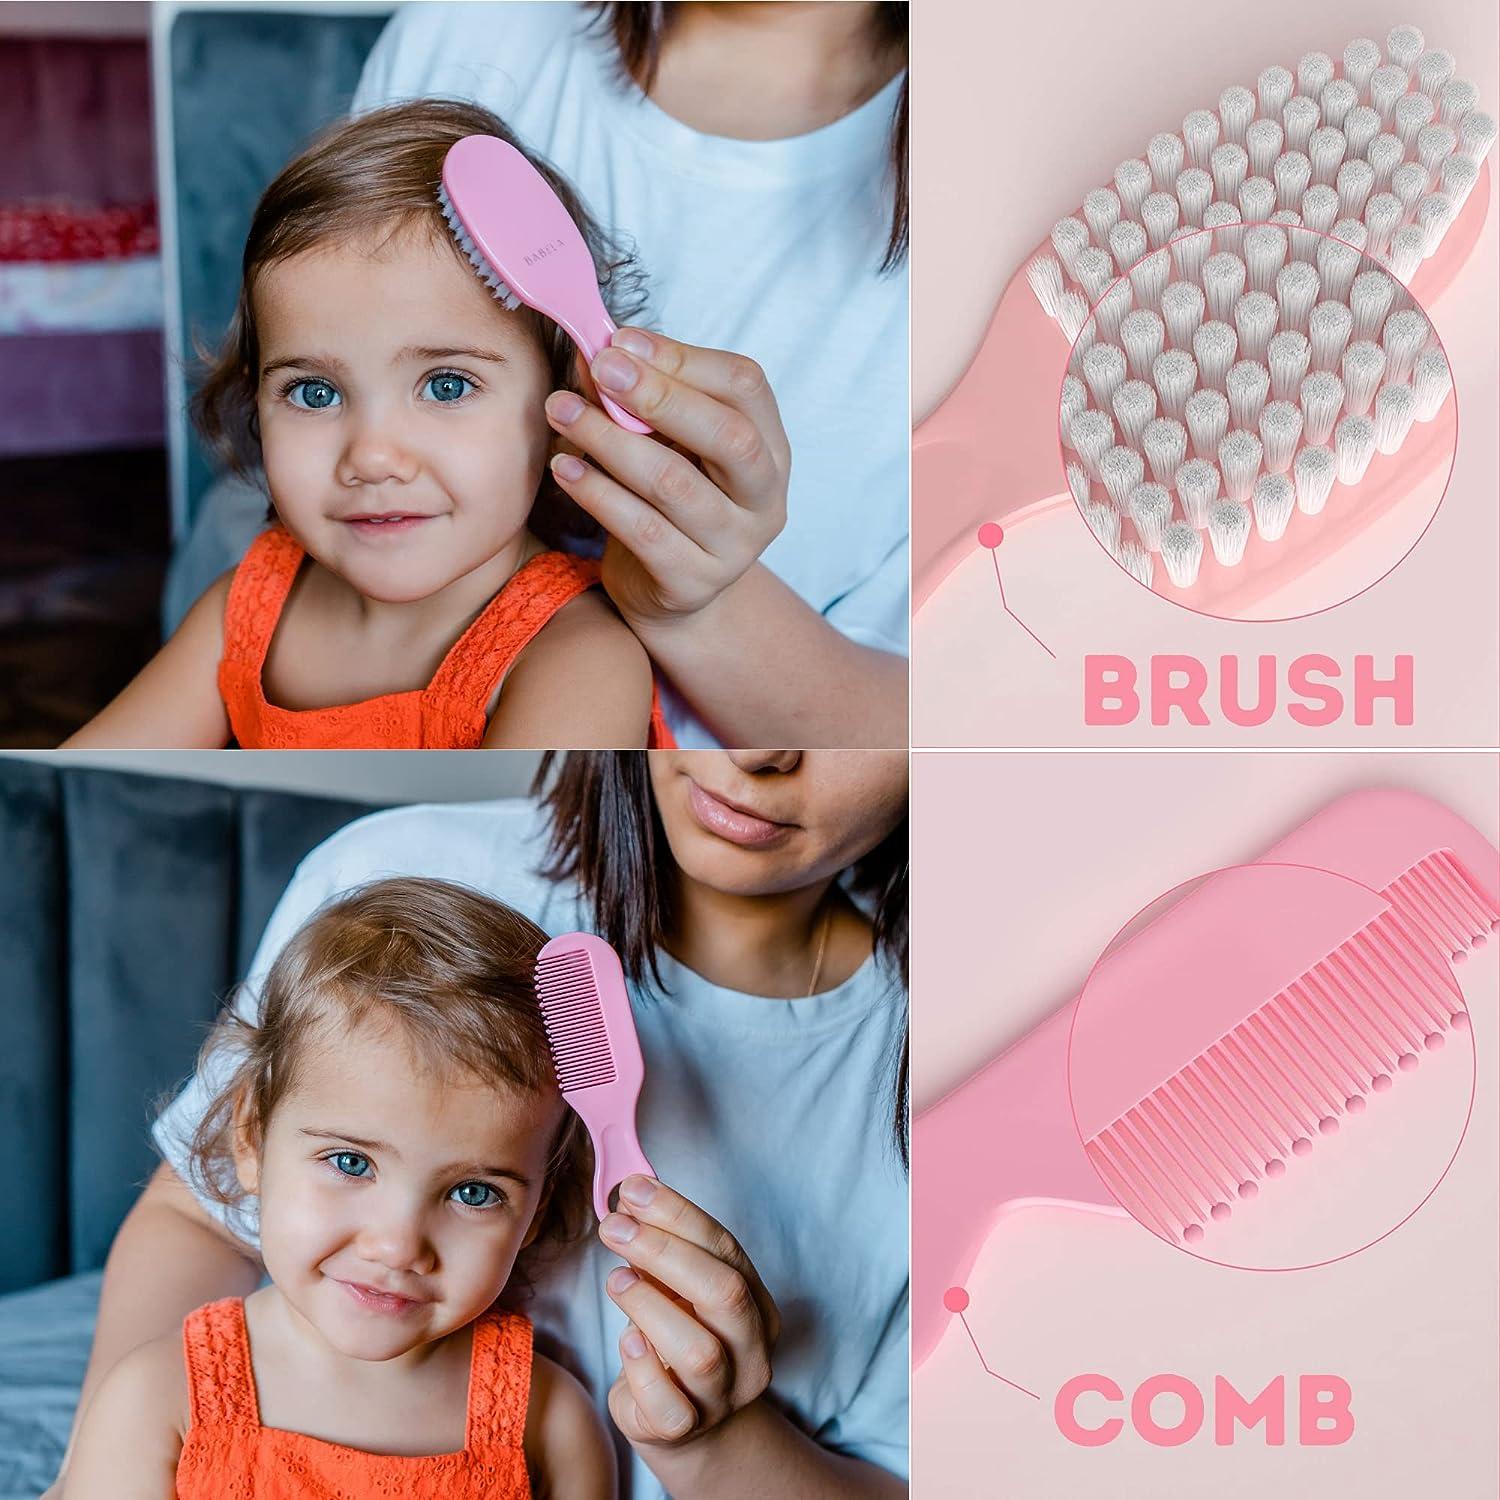 Buy ELOSH Baby Nail File Electric - [2019 Upgraded] Safe Baby Nail Trimmer, Electric  Nail Clipper with Light. Online at Low Prices in India - Amazon.in